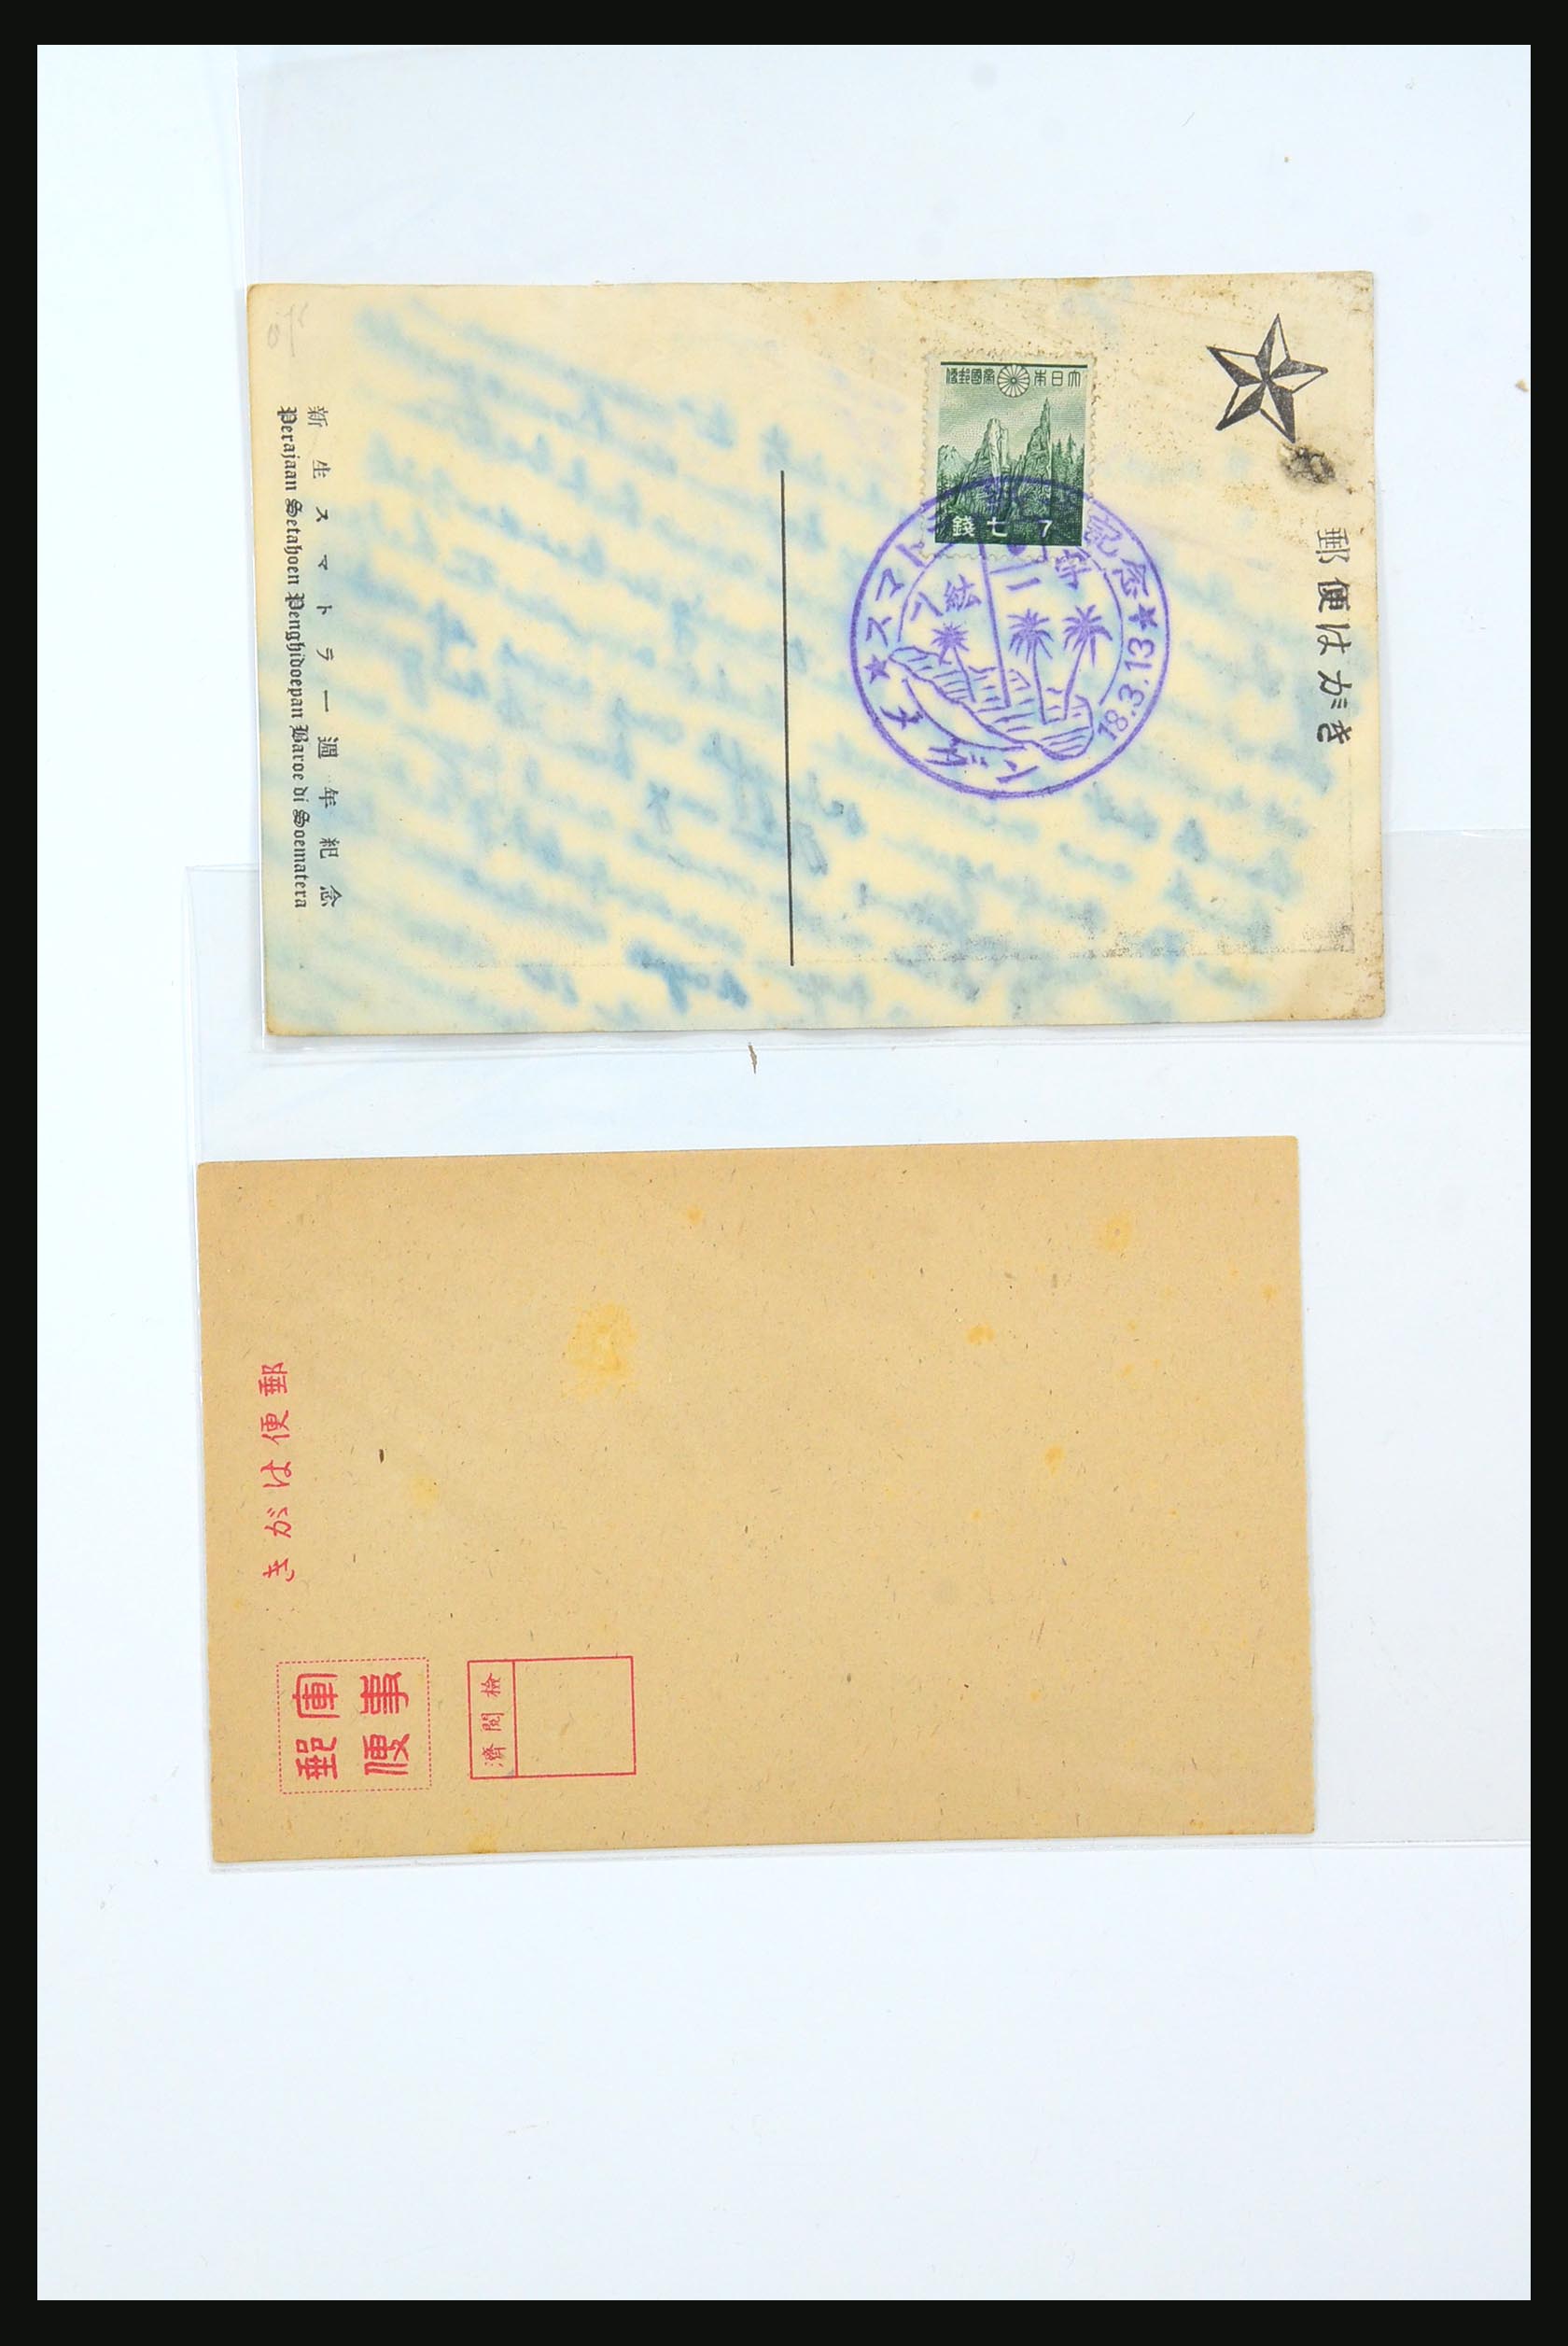 31362 030 - 31362 Netherlands Indies Japanese occupation covers 1942-1945.